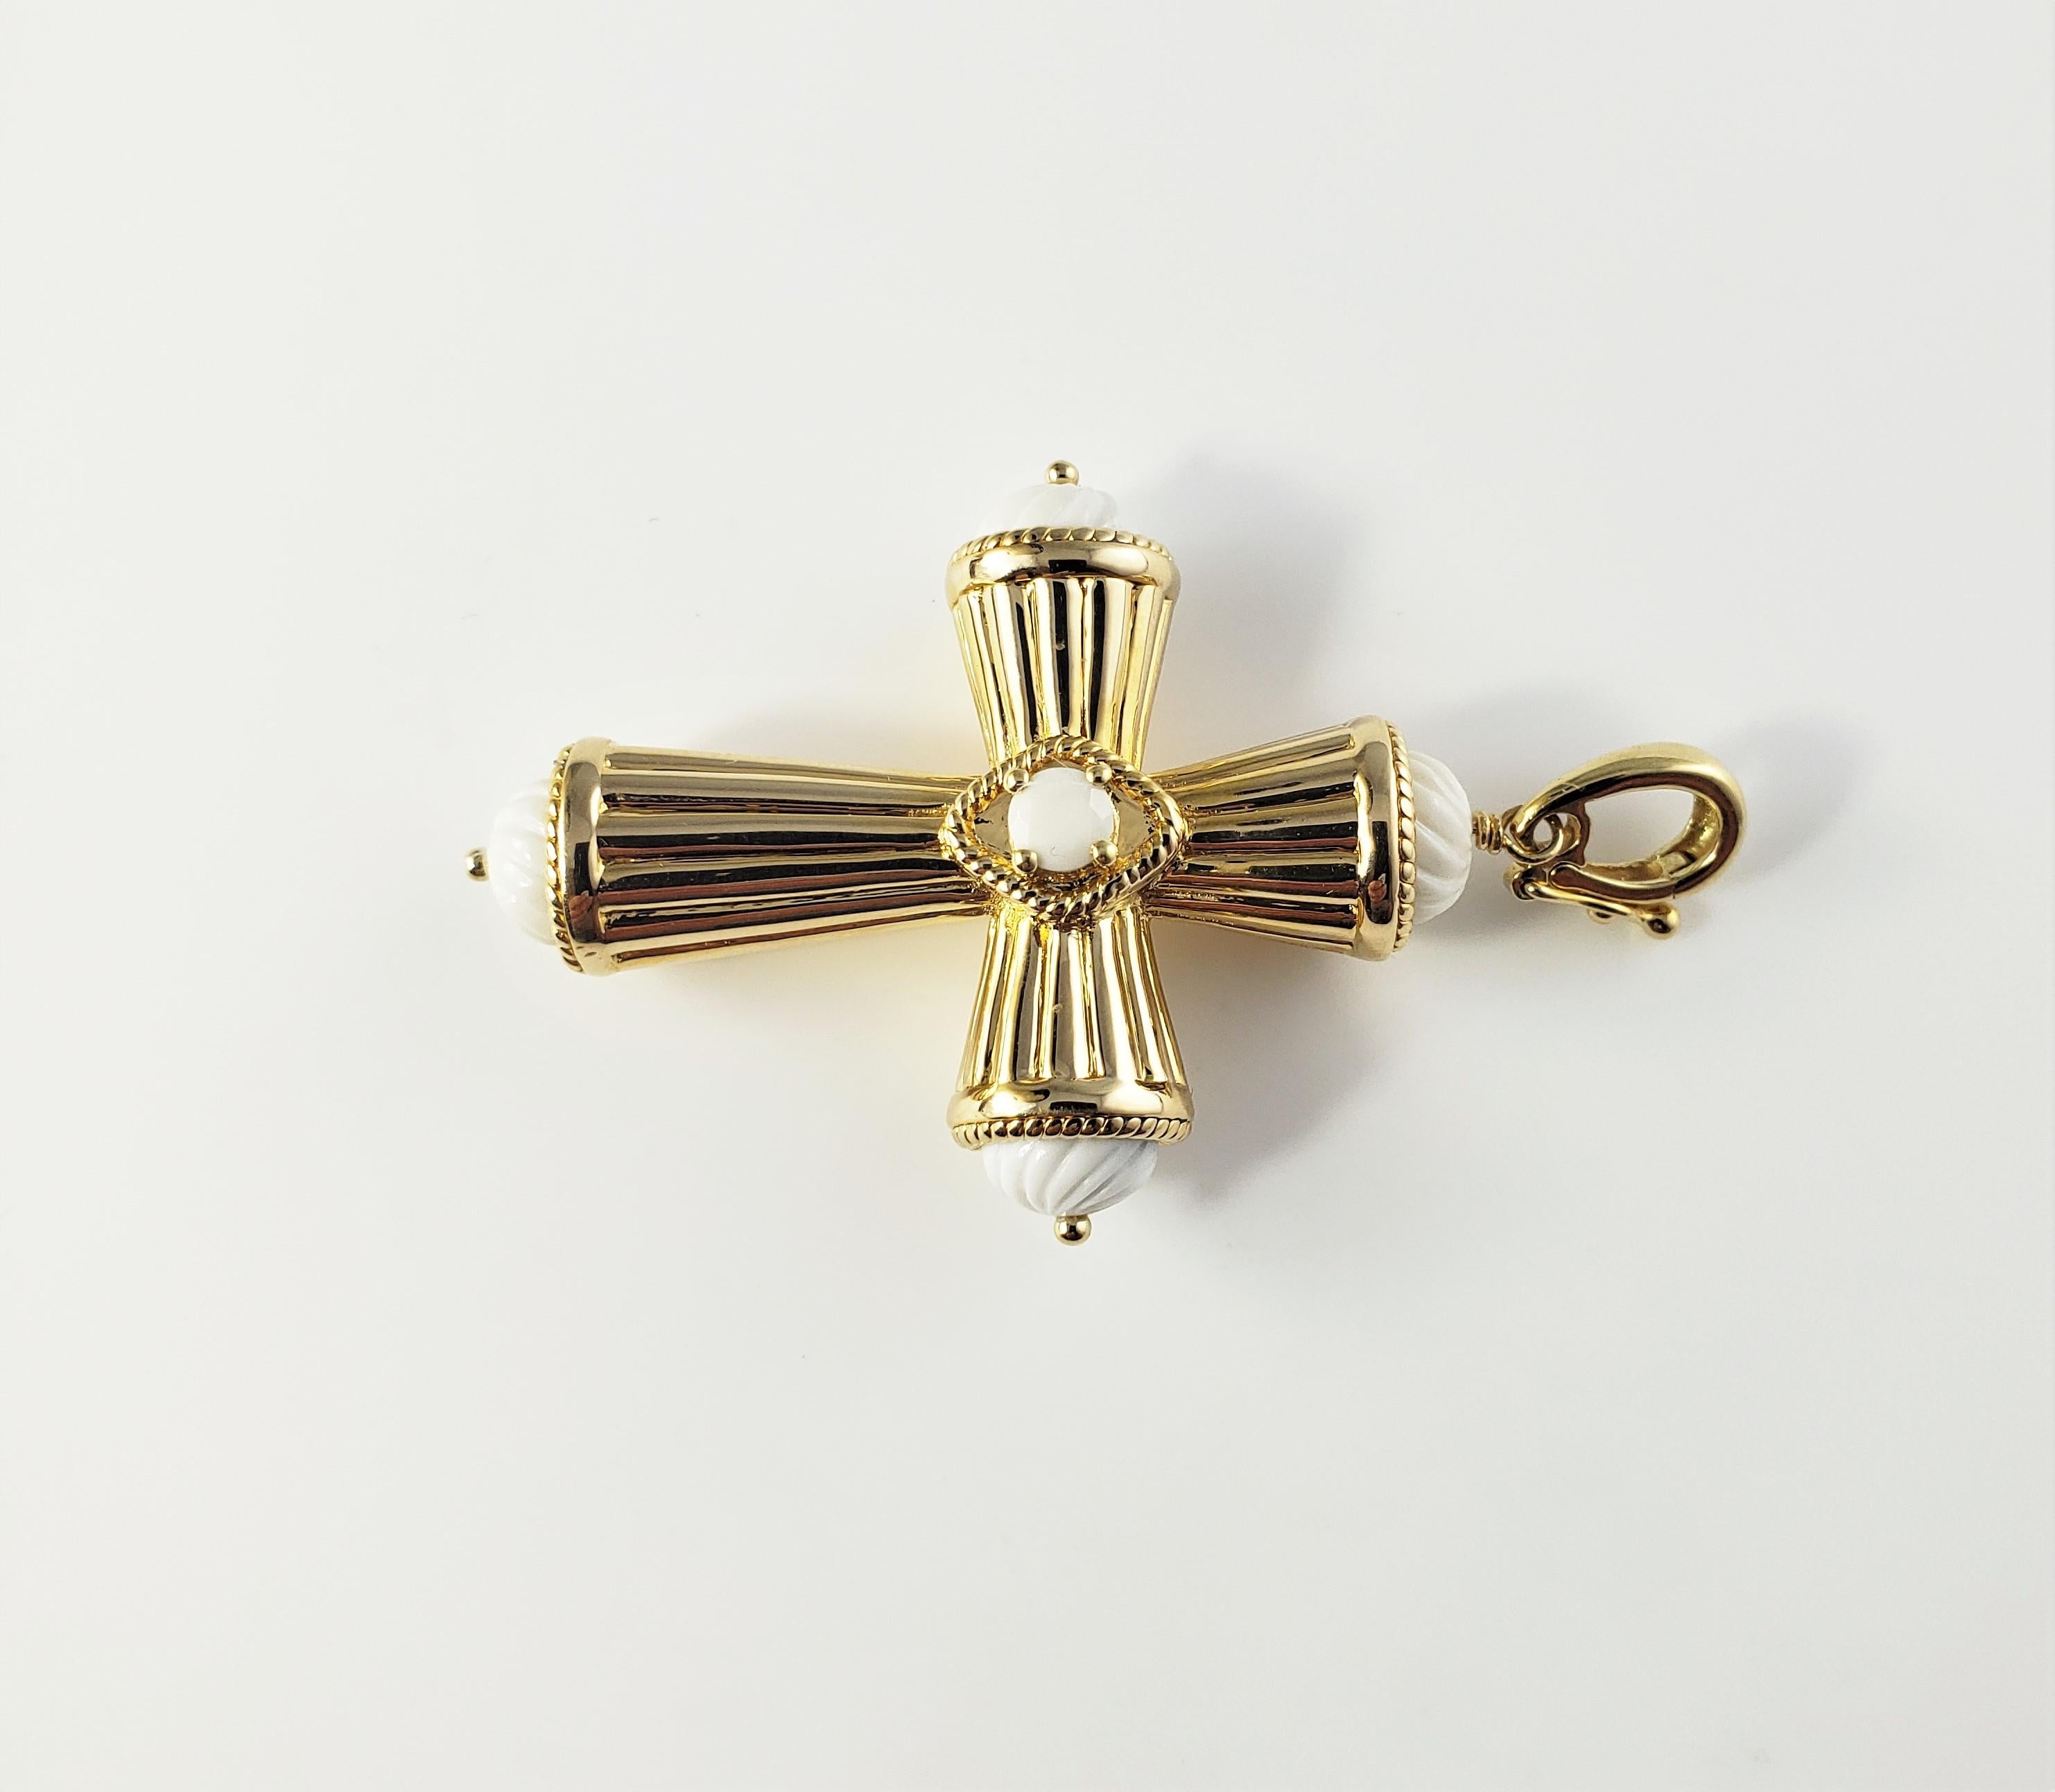 Vintage 18 Karat Yellow Gold Cross Pendant-

This stunning pendant cross pendant is crafted in beautifully detailed 18K yellow gold accented with white carved stones.

Size:  45 mm x  33 mm 

Weight:  5.5 dwt. /  8.7 gr. 

Stamped:  18K

Very good